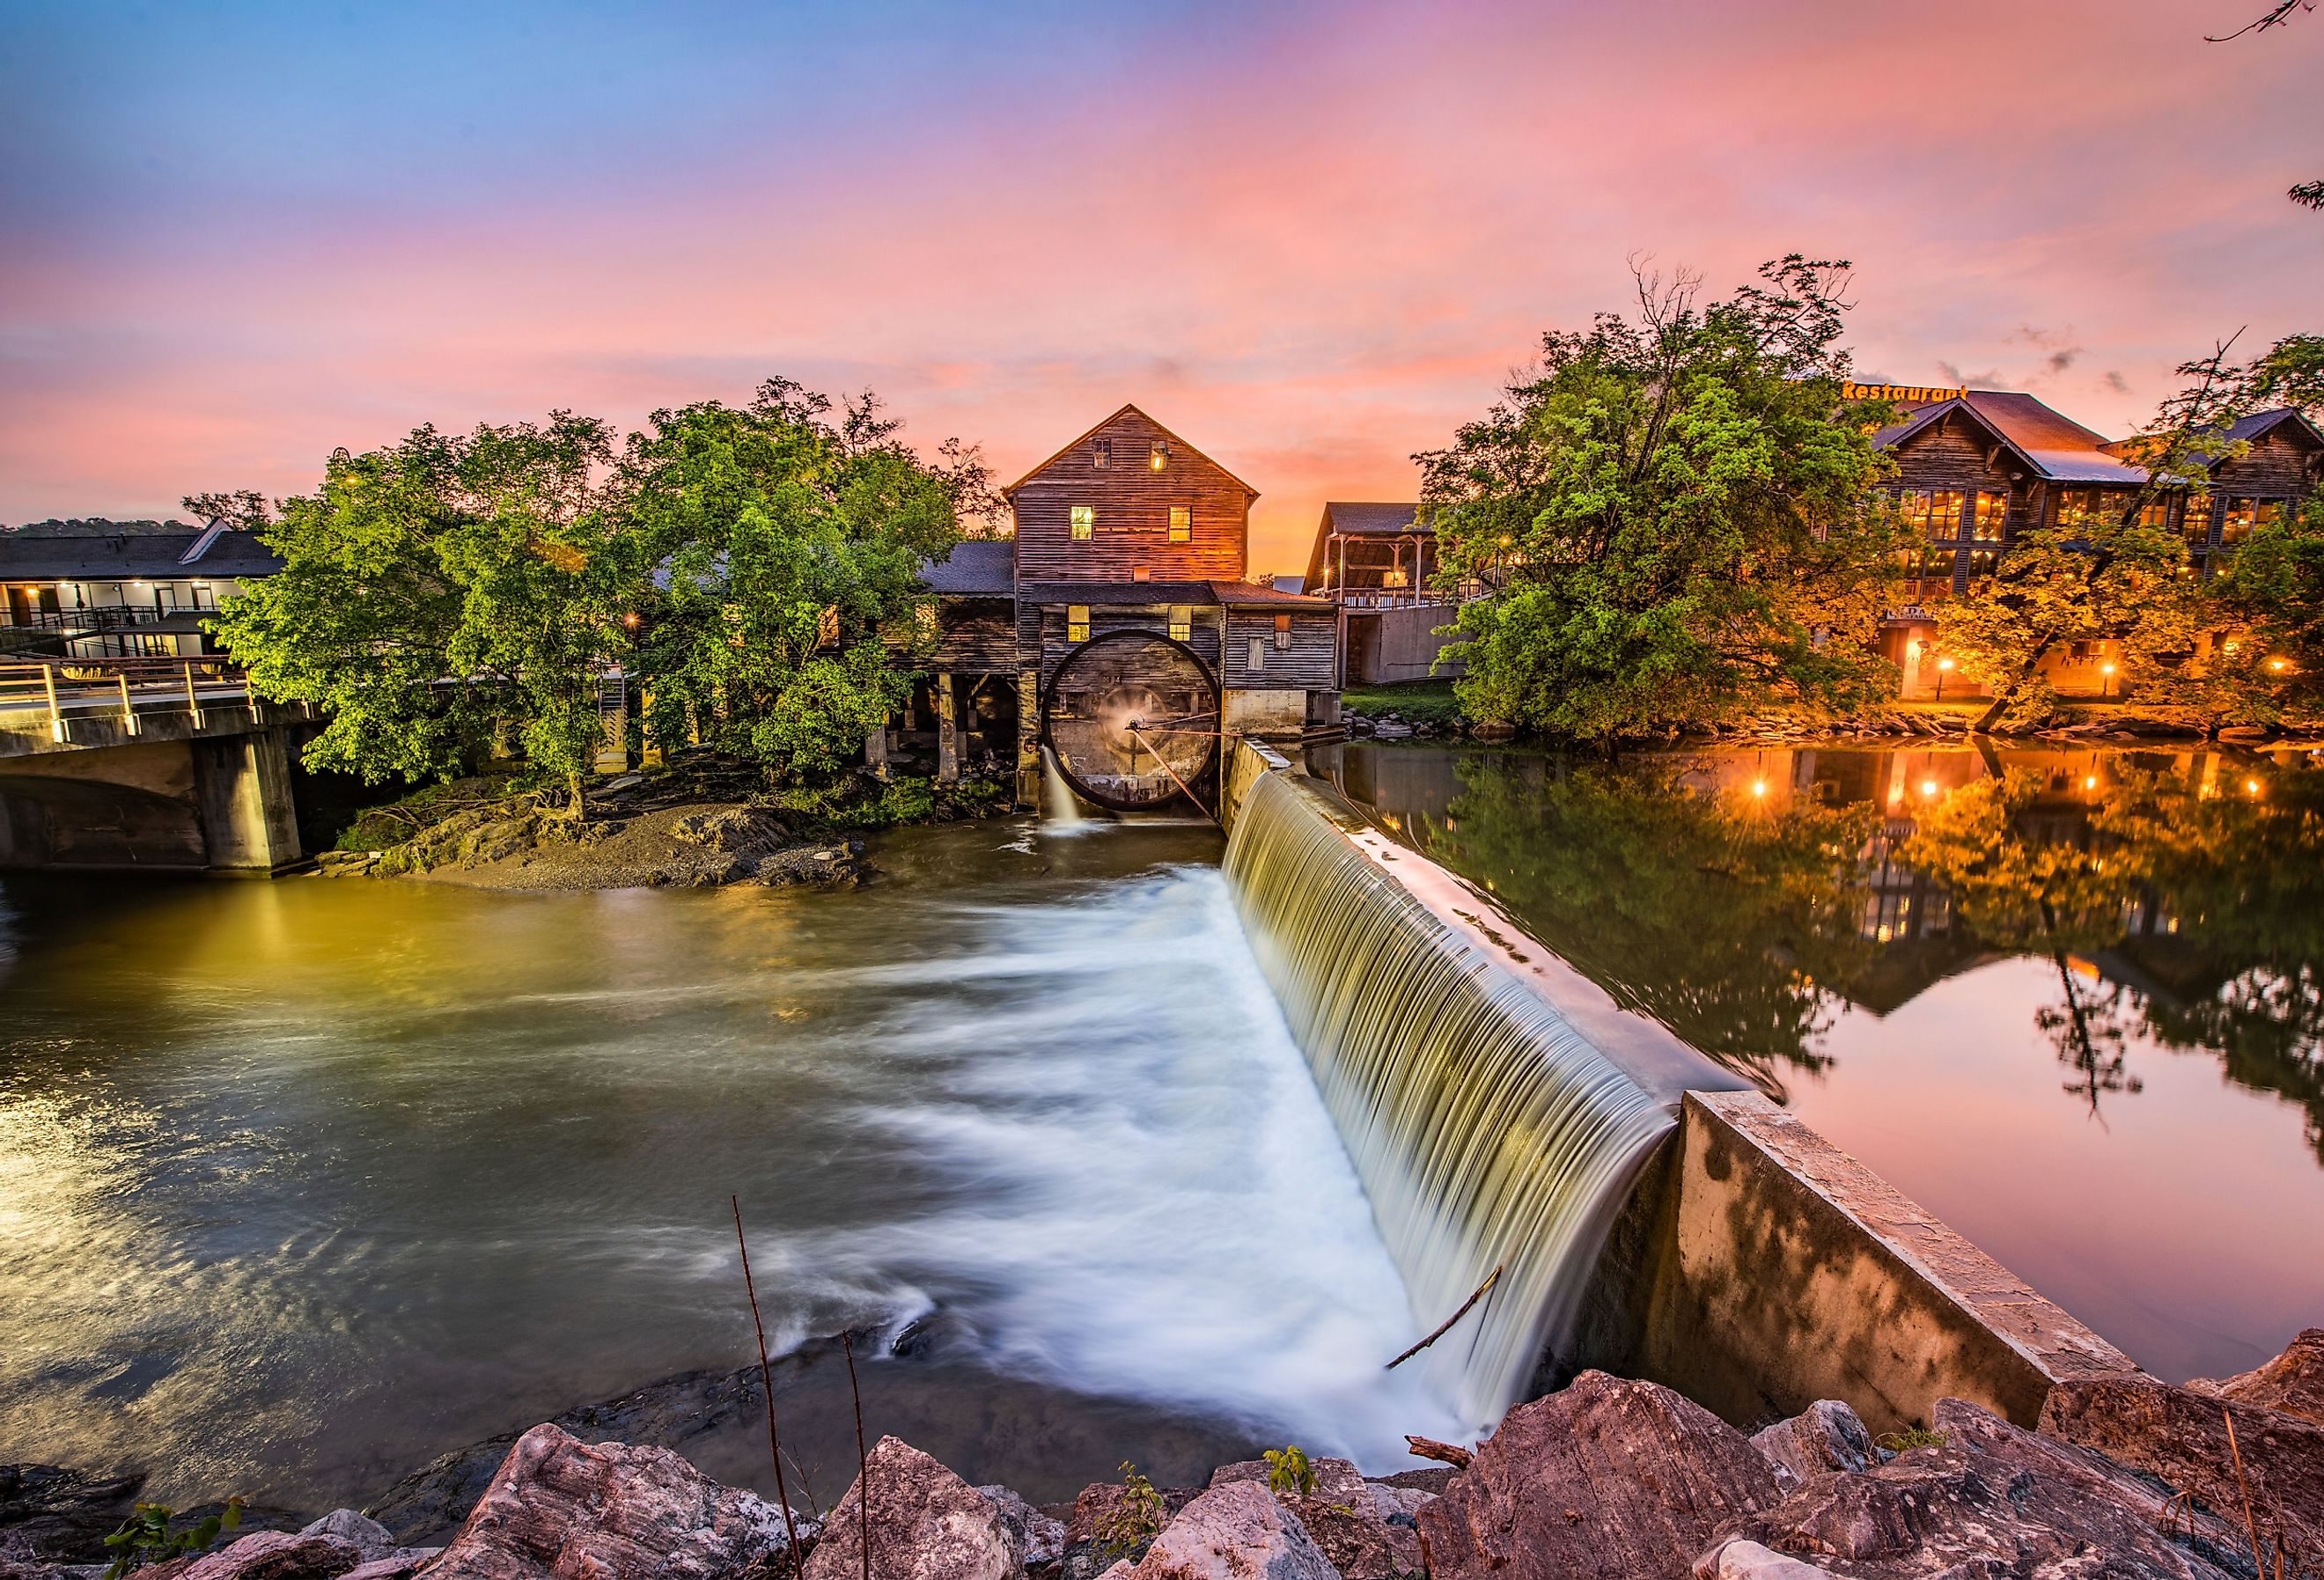 Old Mill at Sunrise, Pigeon Forge, Tennessee. Image credit Kevin Ruck via Shutterstock